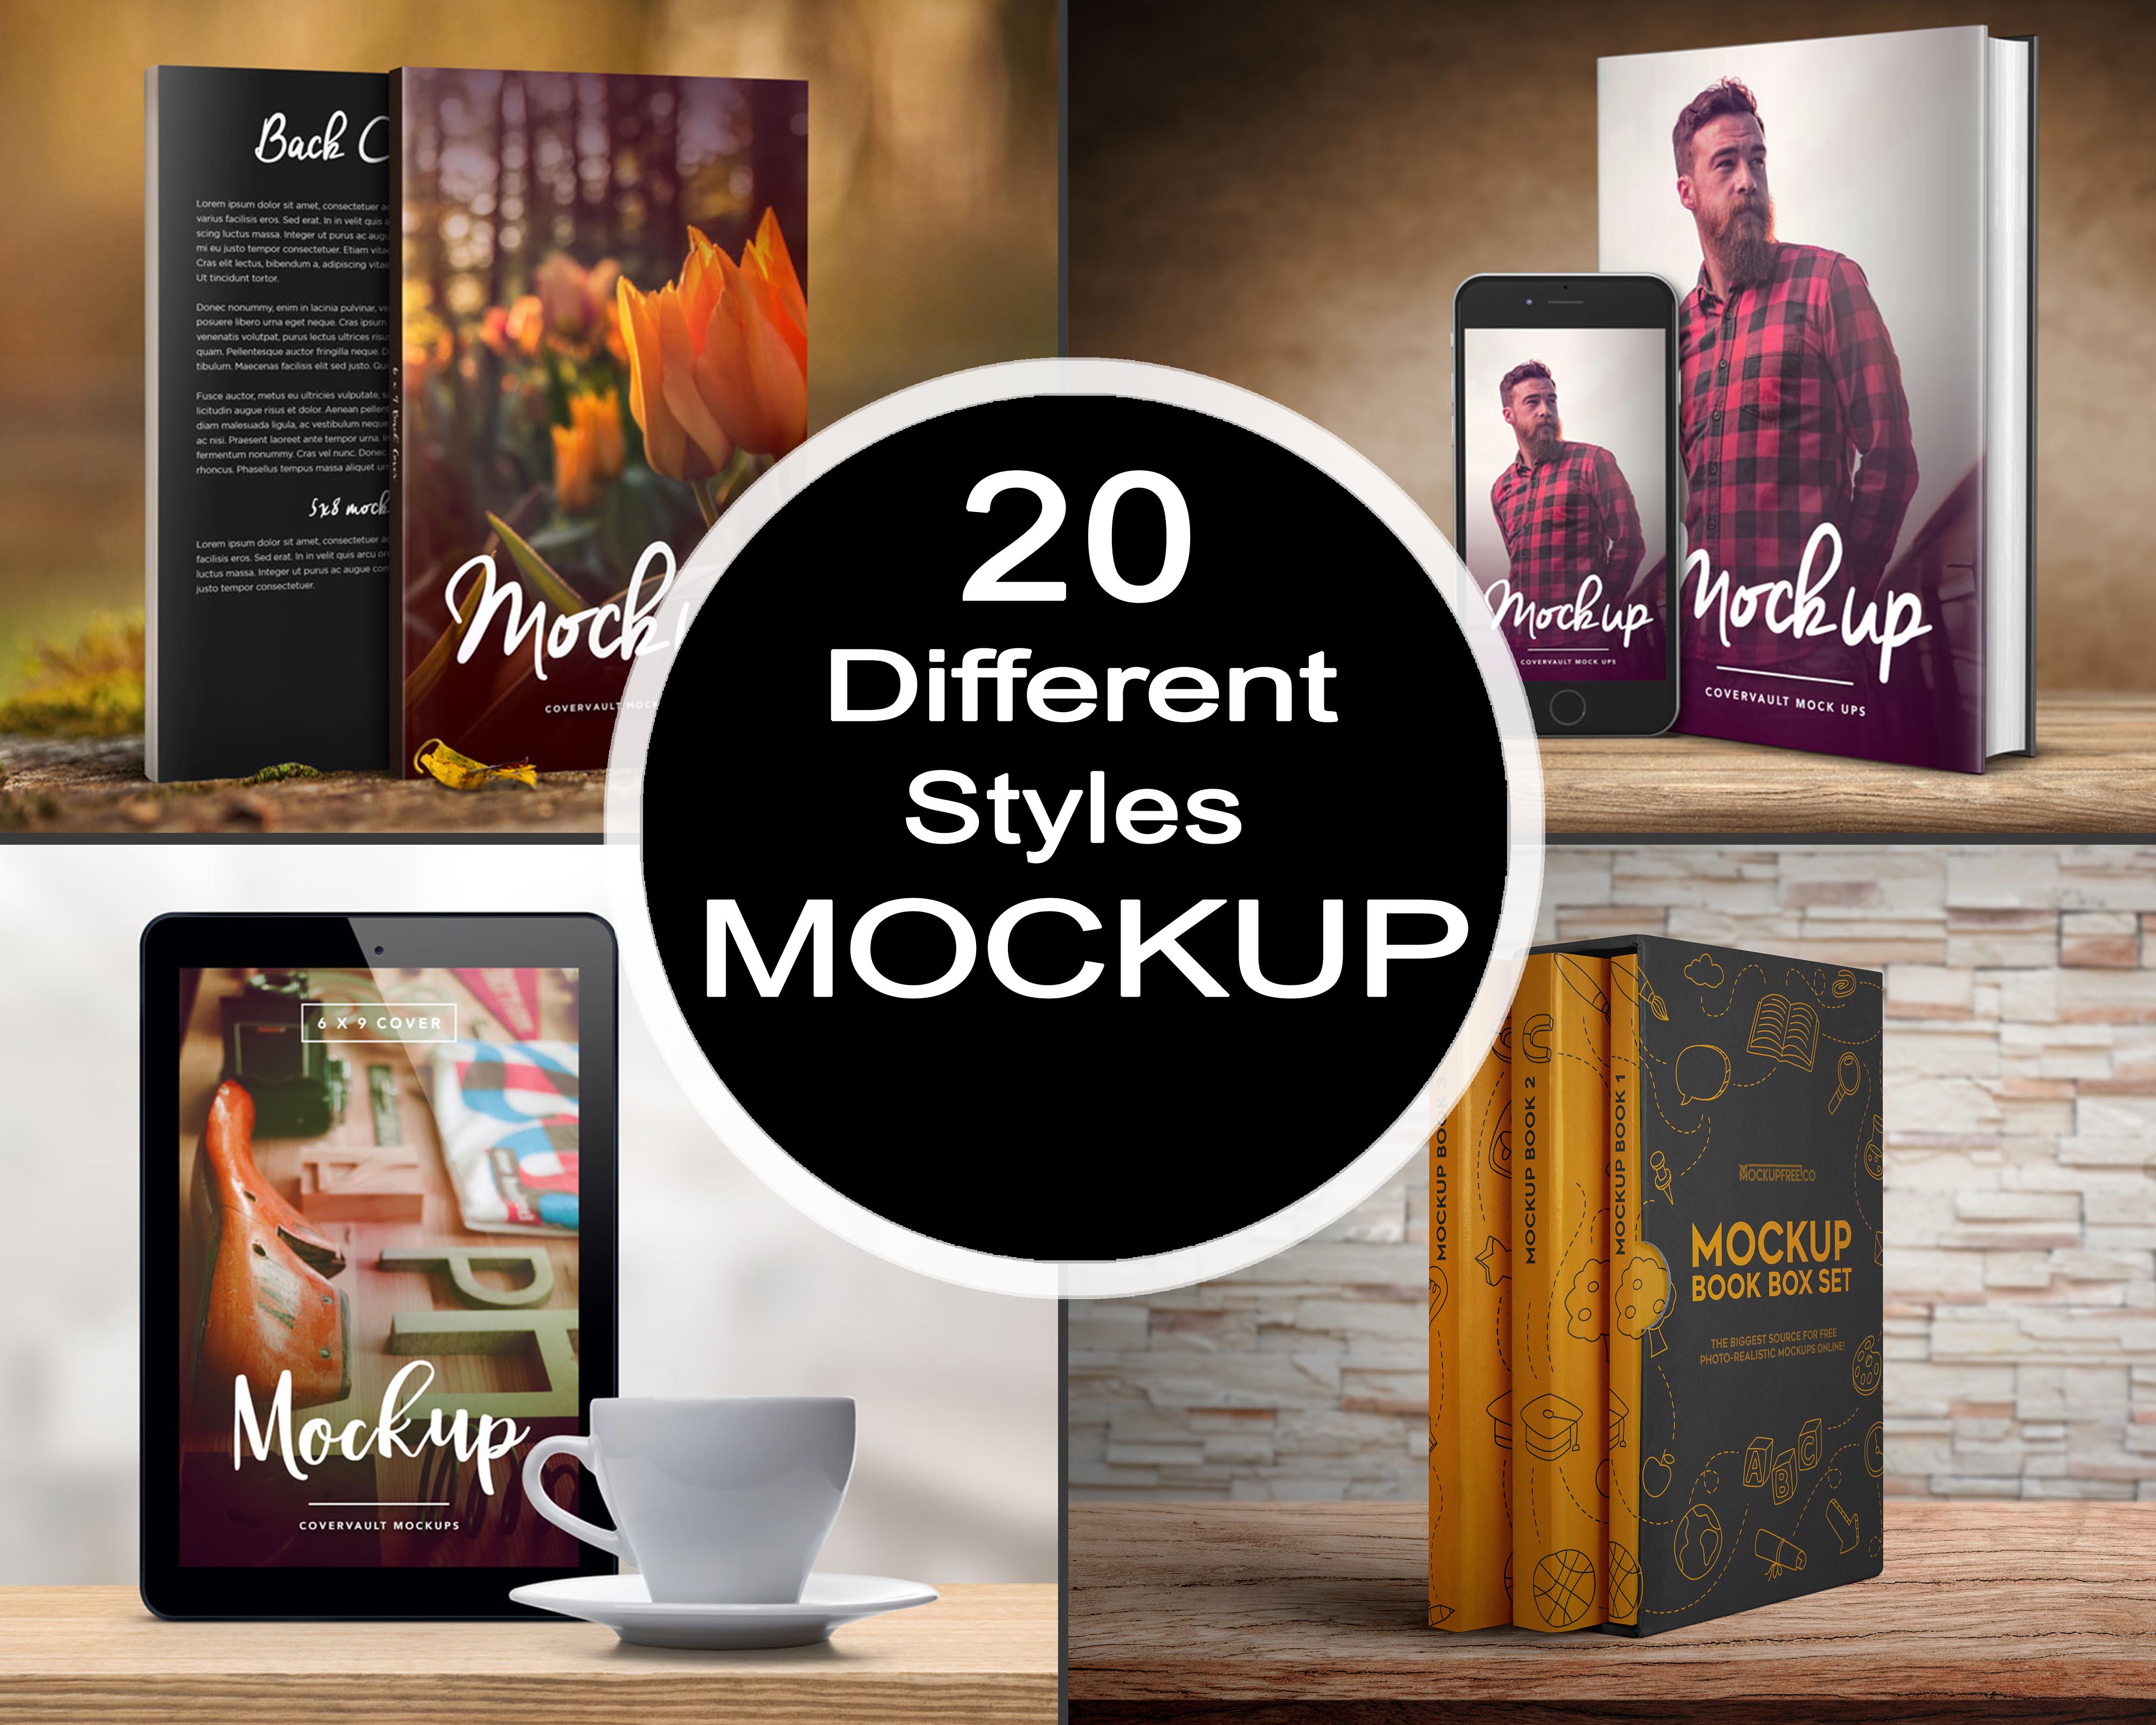 Download Amazing 3d book cover mockup in 20 different styles for $5 - SEOClerks